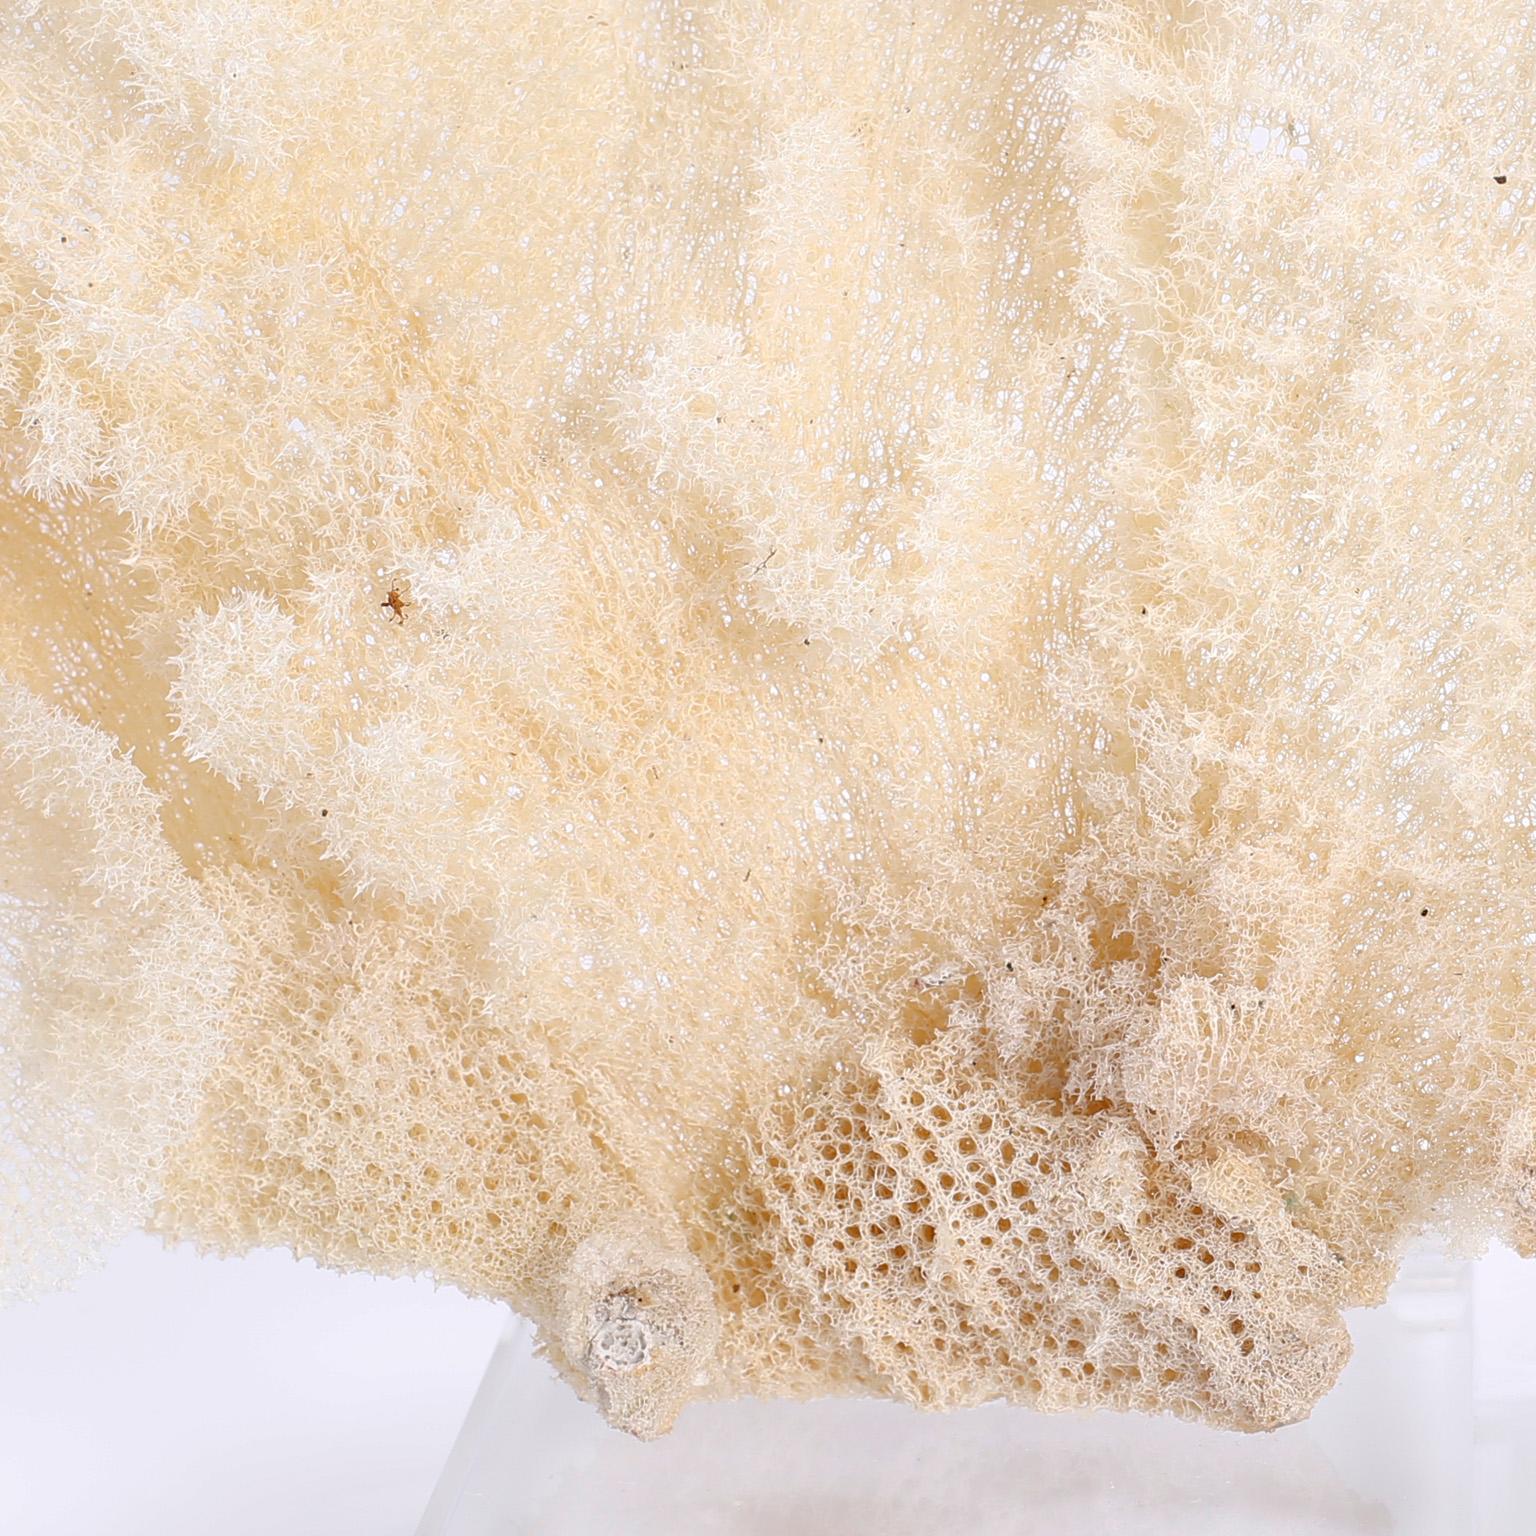 Organic Modern Two Sea Sponge Specimens on Lucite, Priced Individually